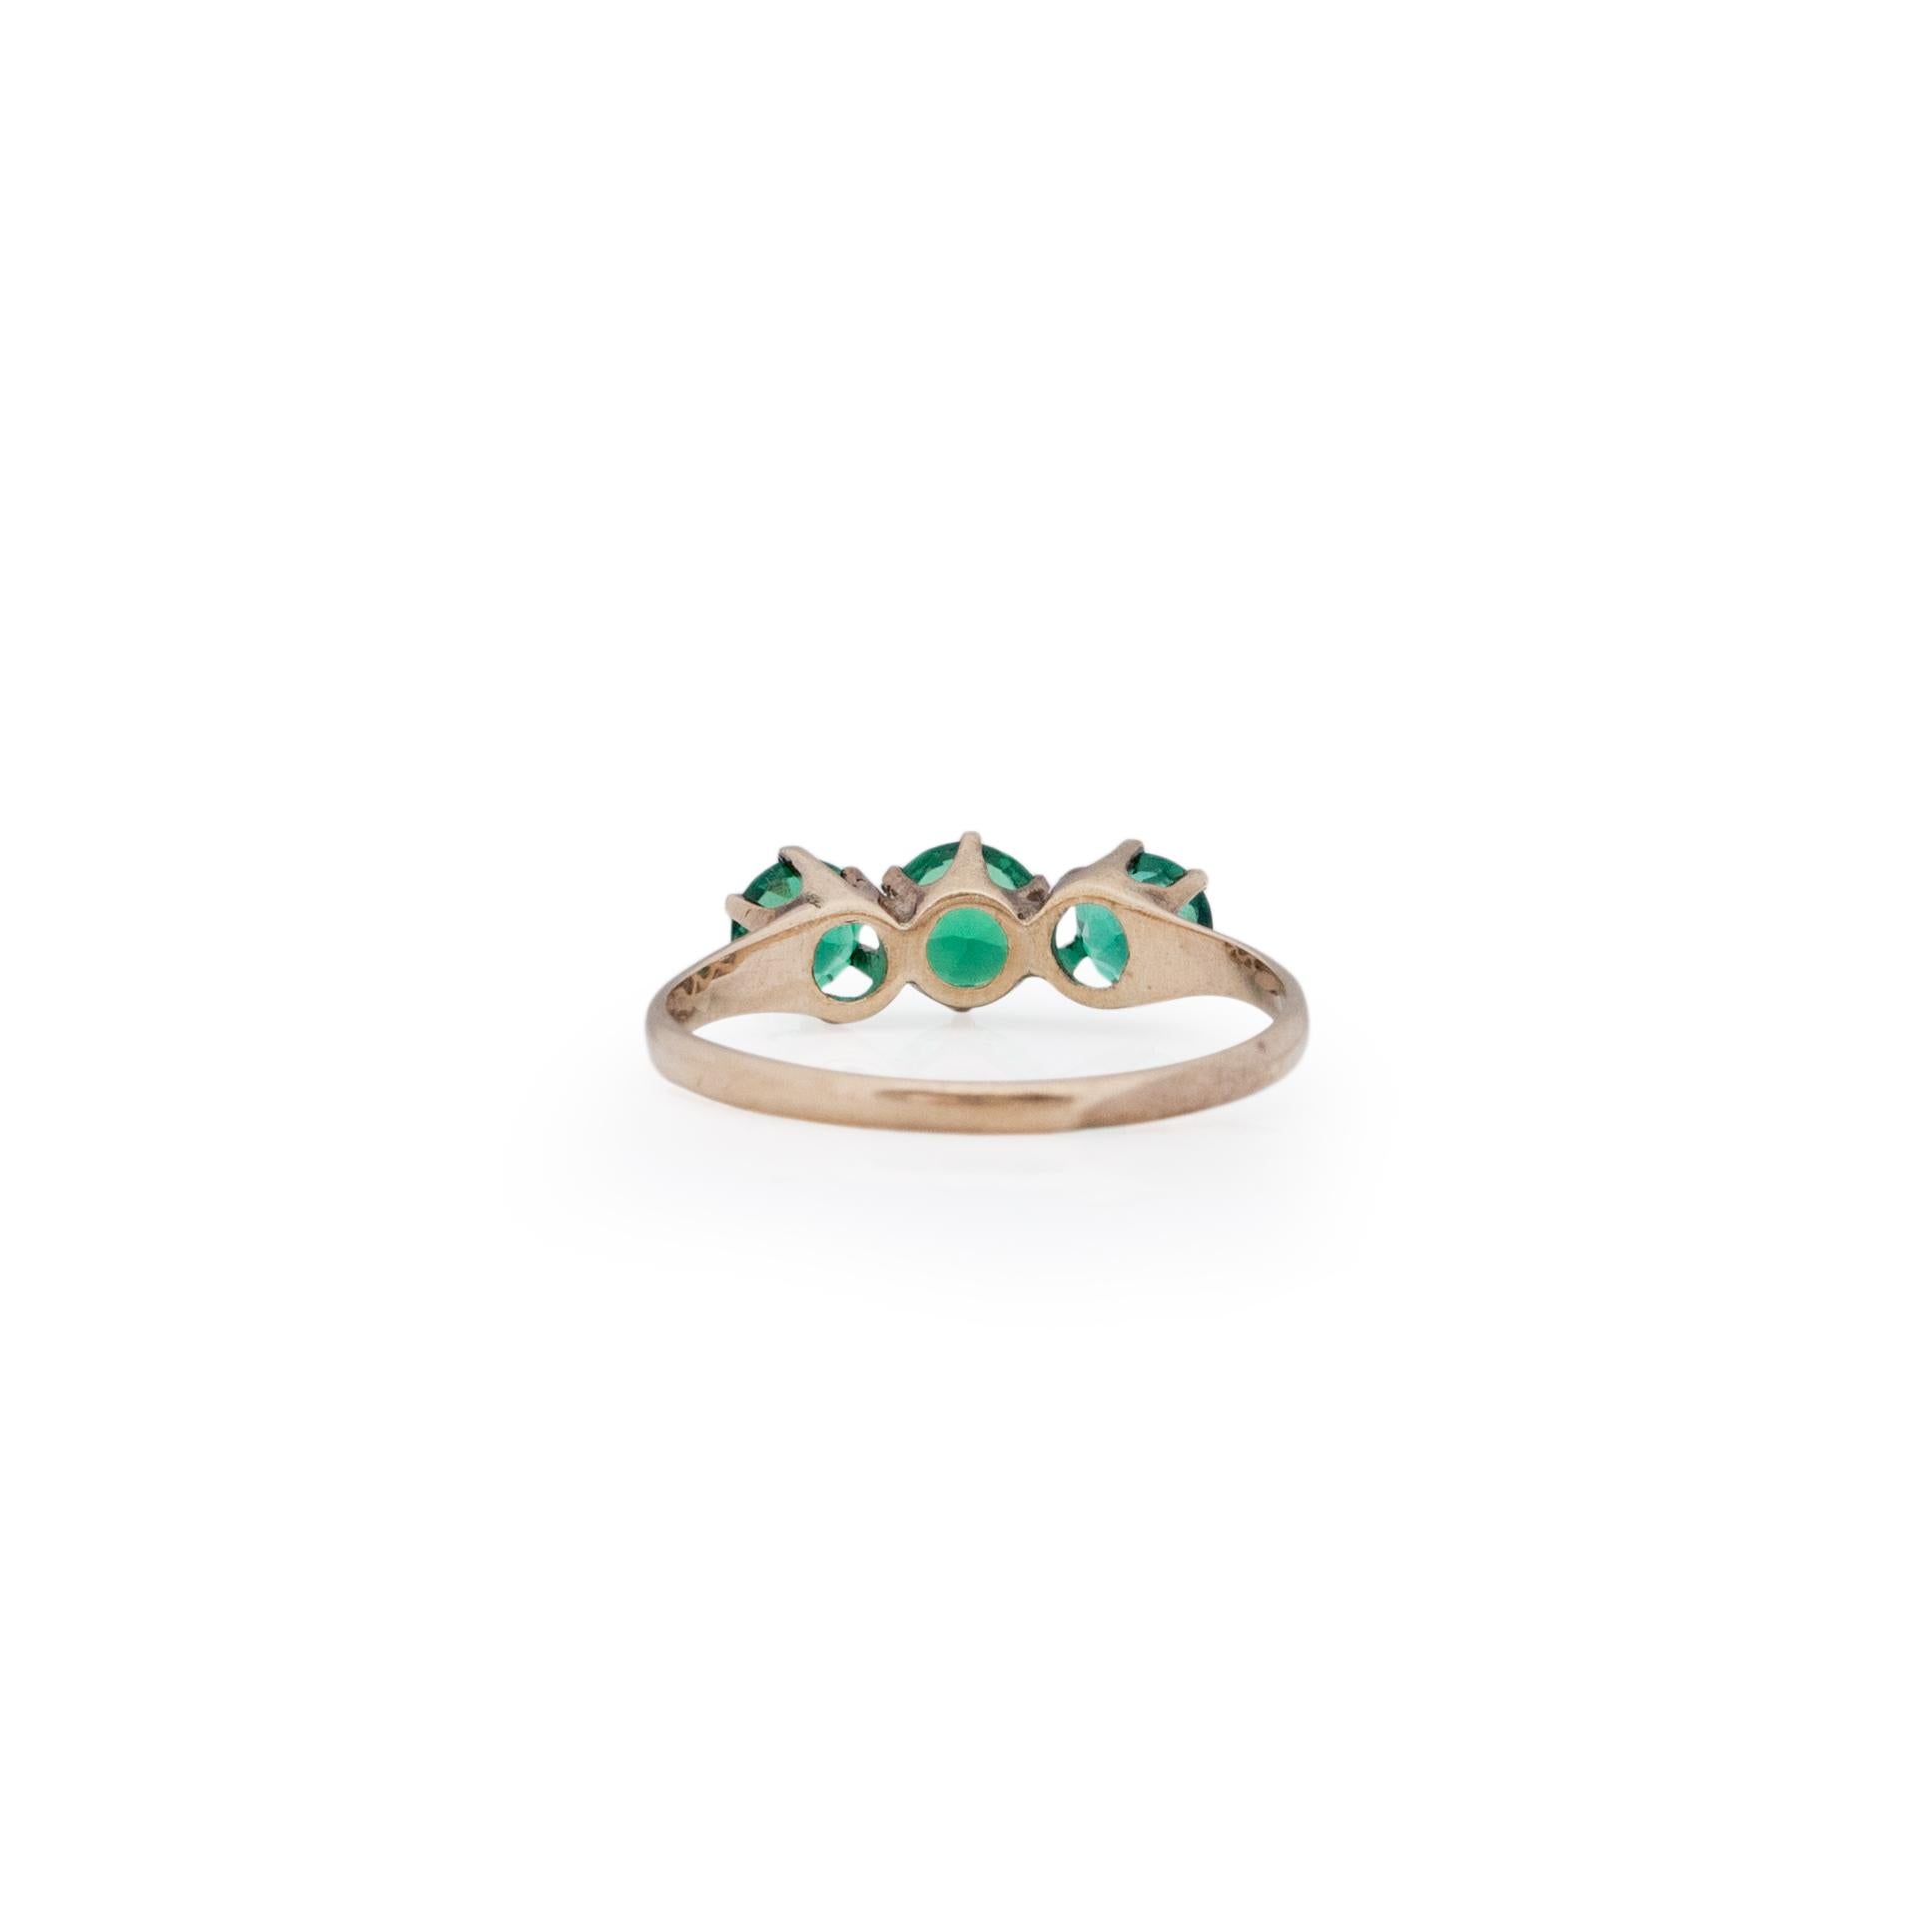 10k gold ring with green stone